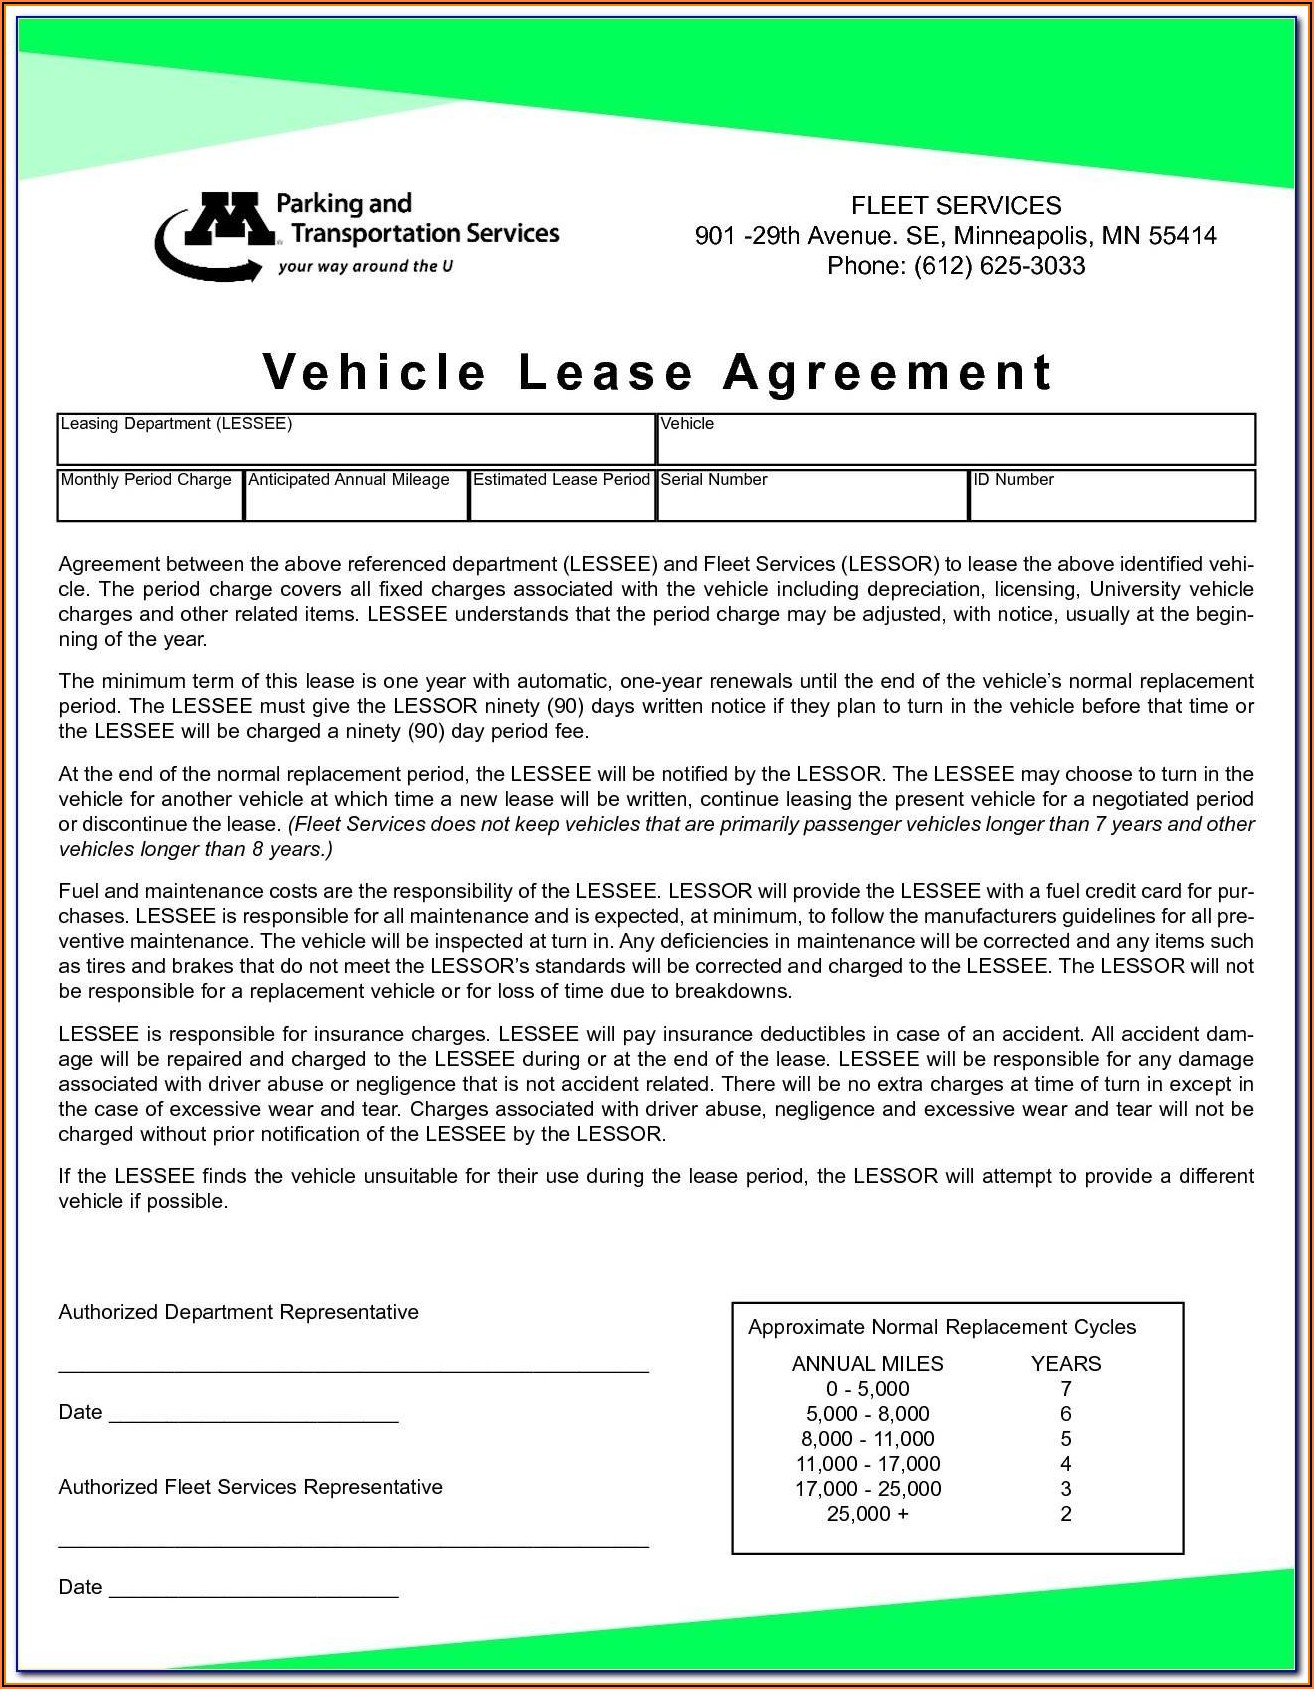 Vehicle Lease Agreement Template Uk